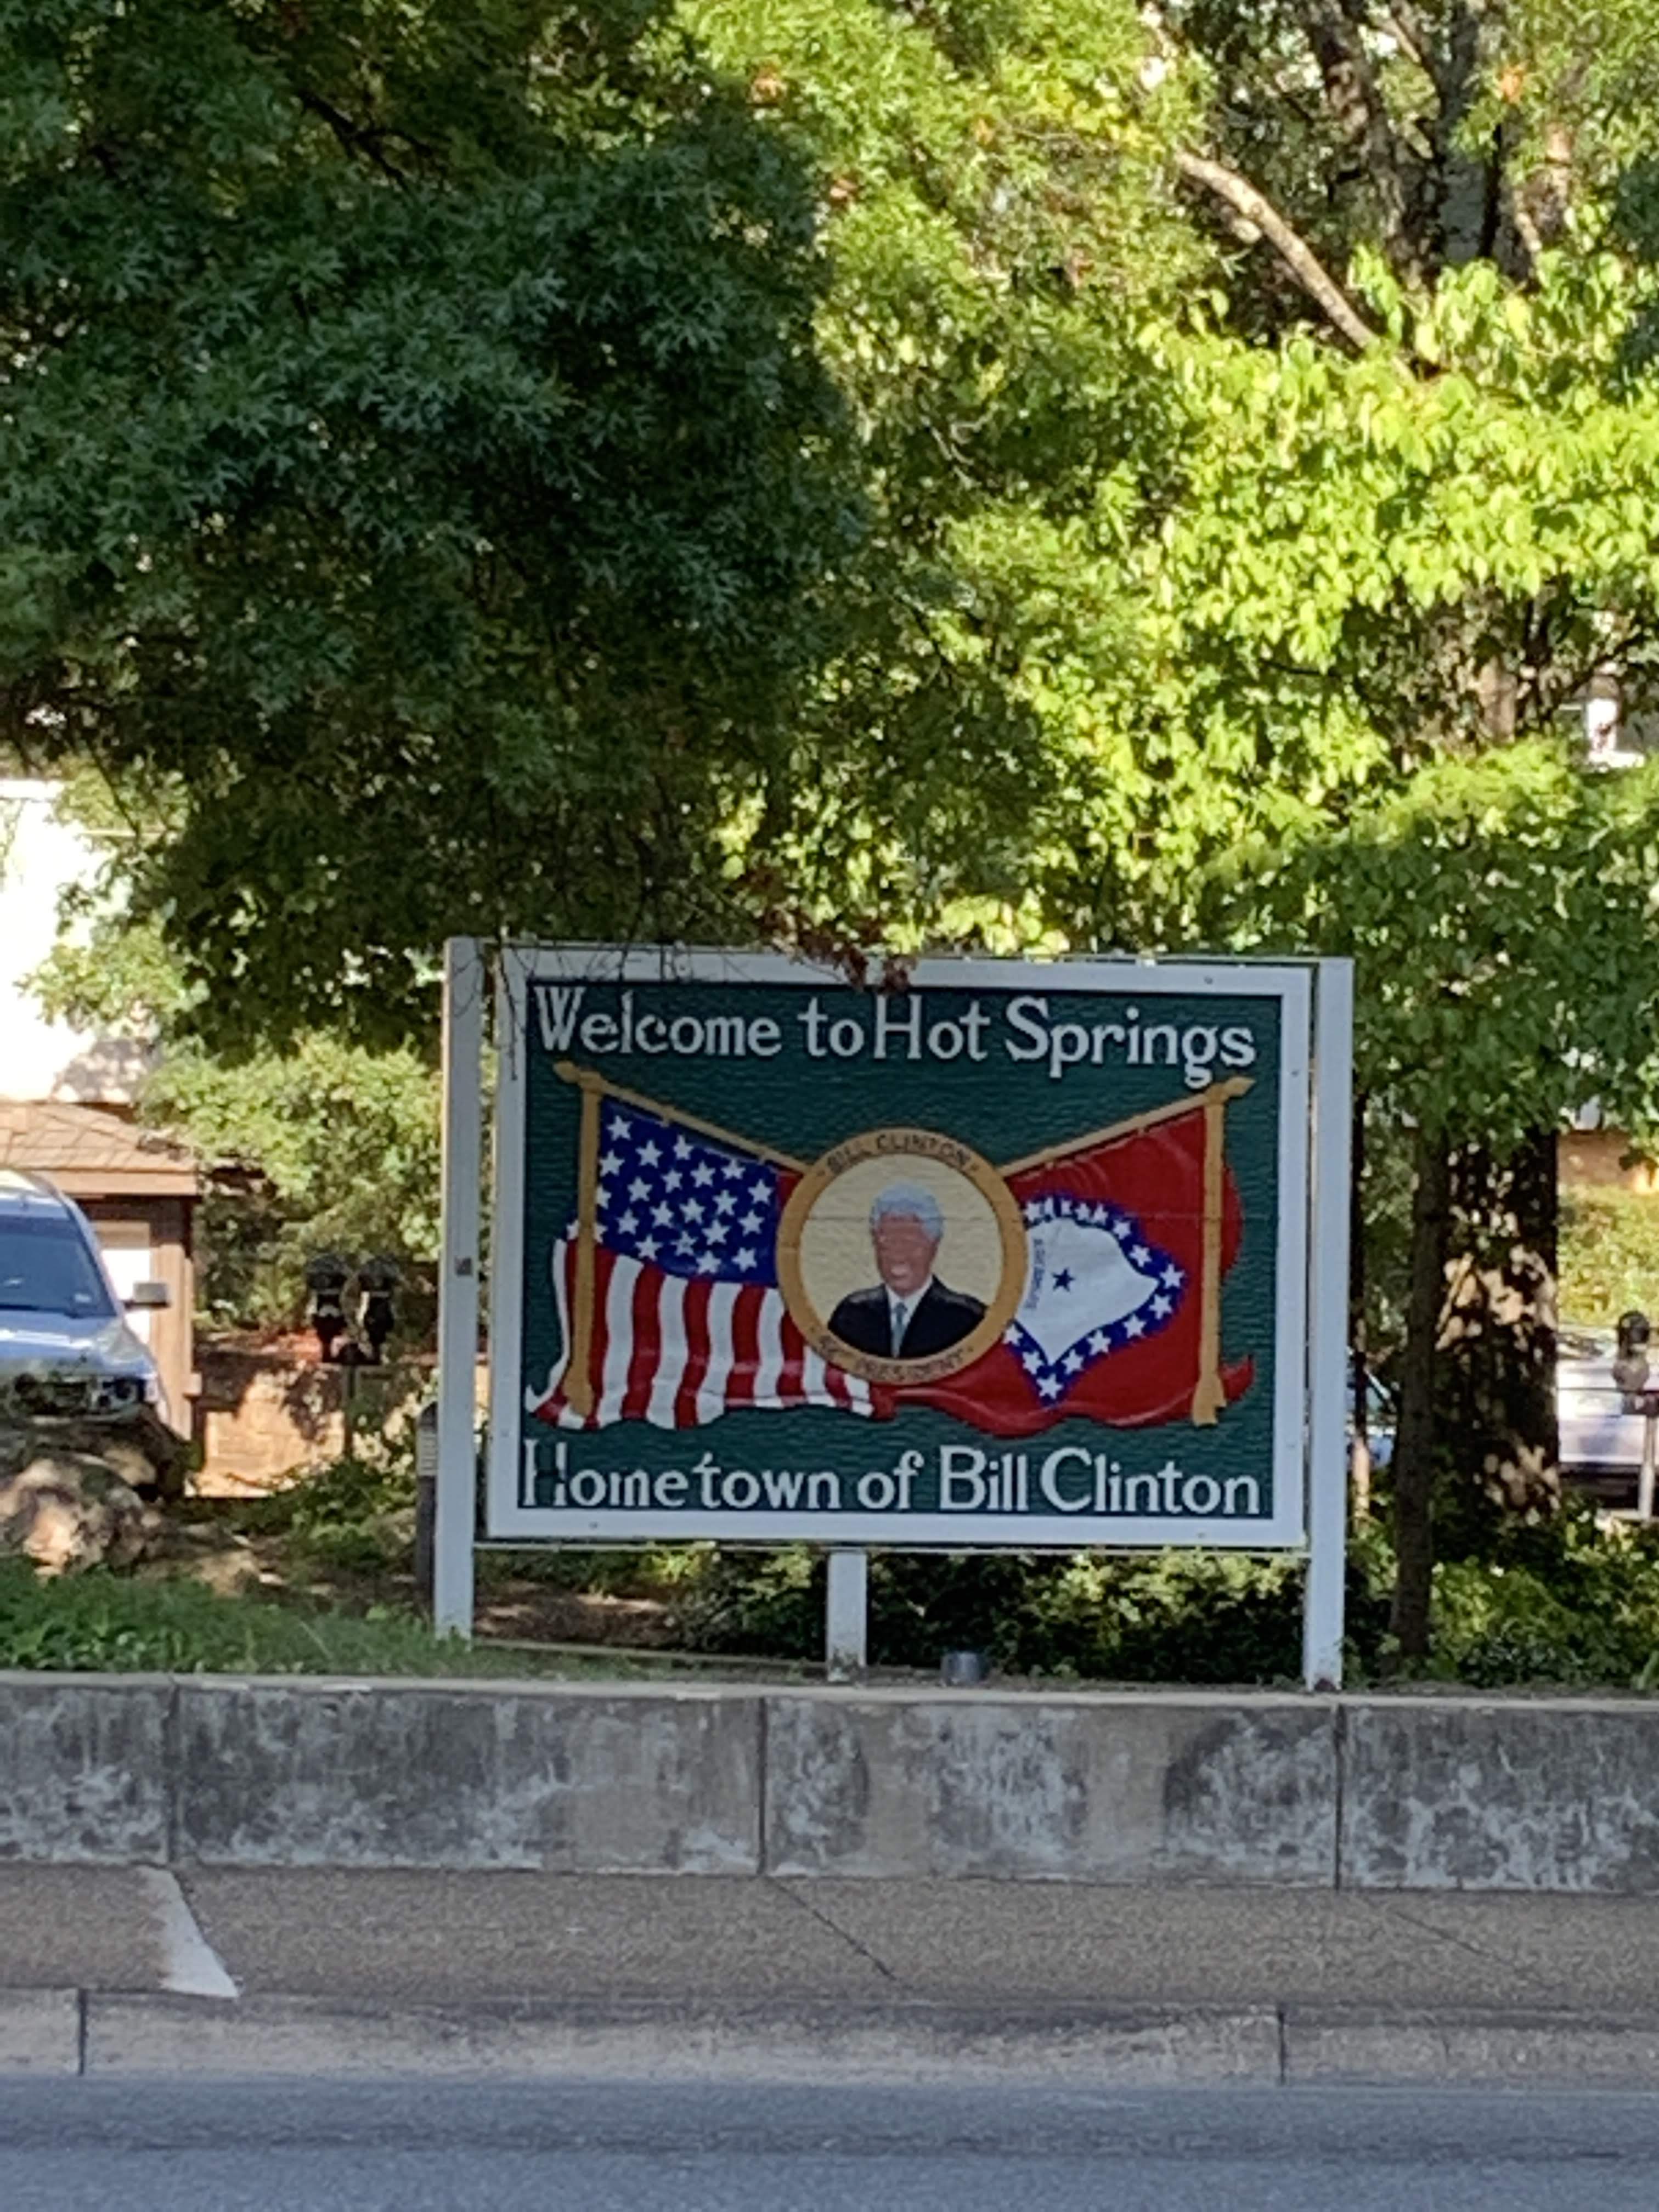 Welcome to Hot Springs Arkansas, hometown of Bill Clinton